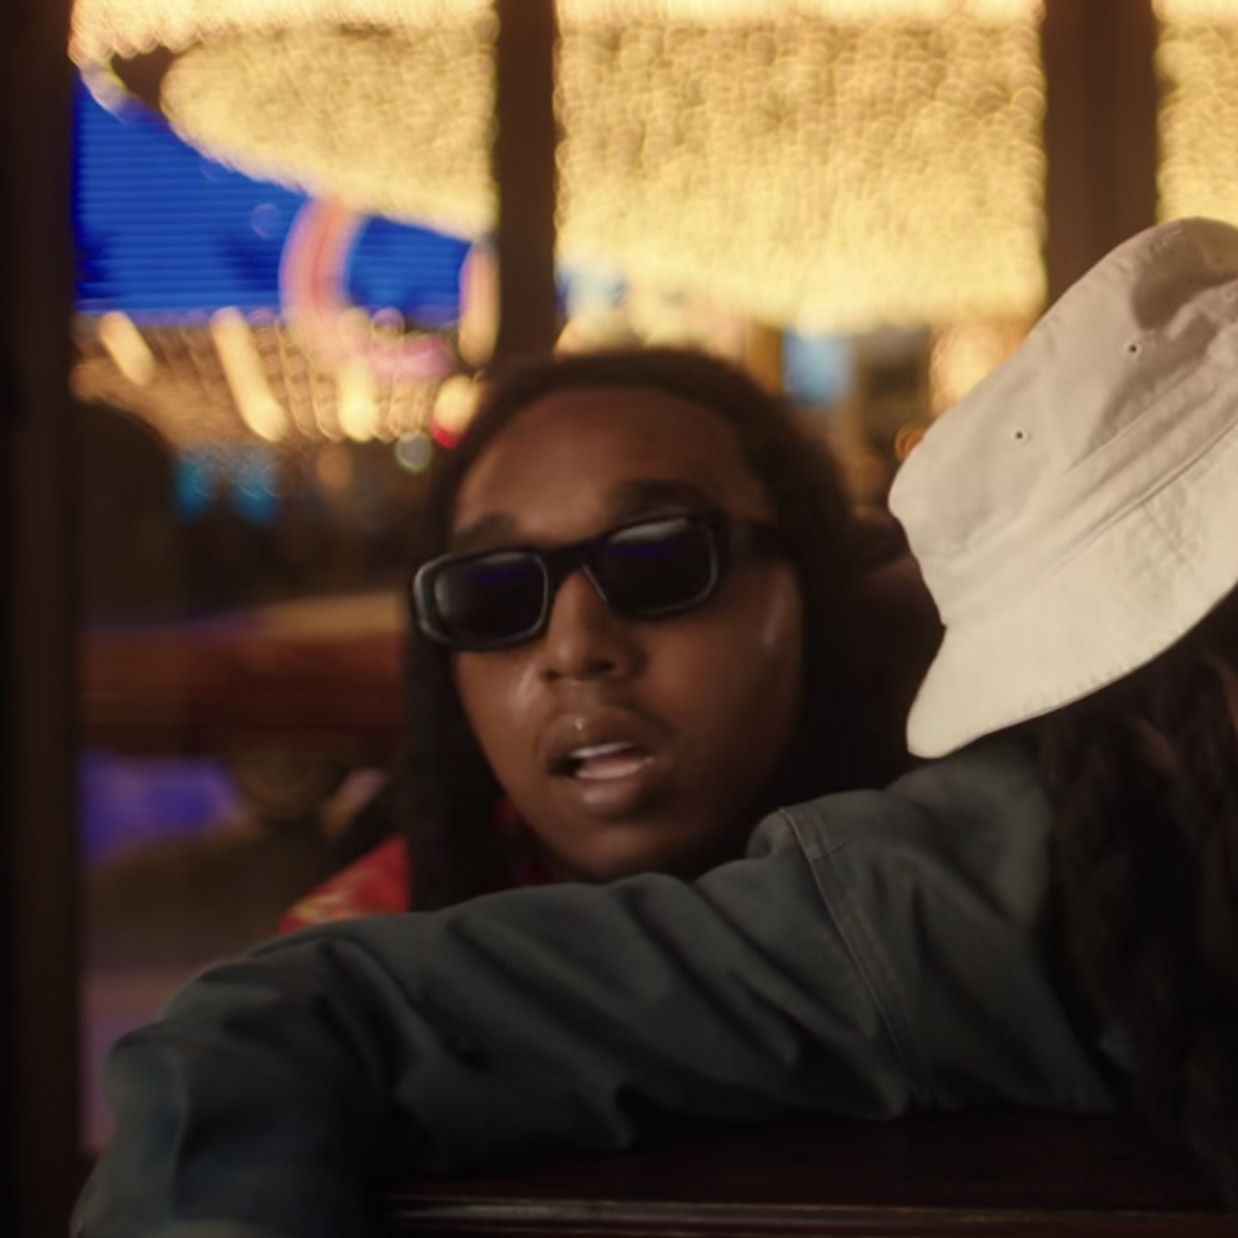 White sunglasses worn by Takeoff in HOTEL LOBBY by Quavo & Takeoff